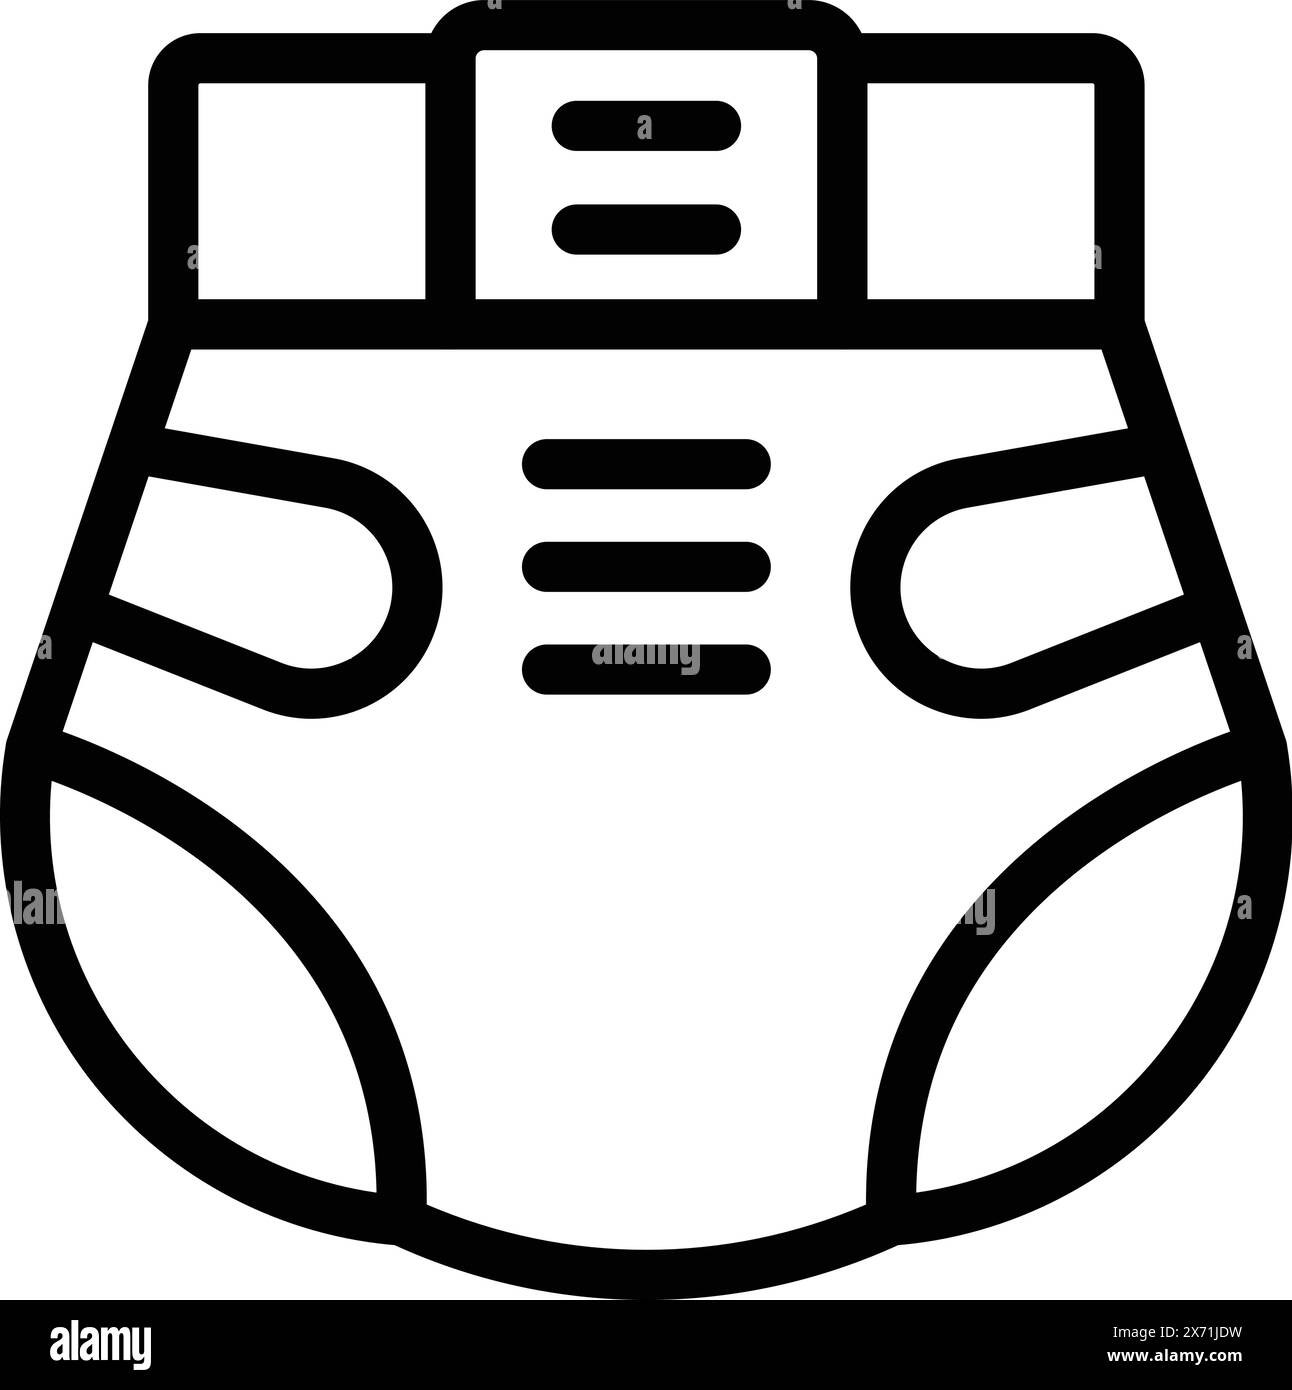 Vector illustration of a baby diaper icon in a simple black and white line art style Stock Vector